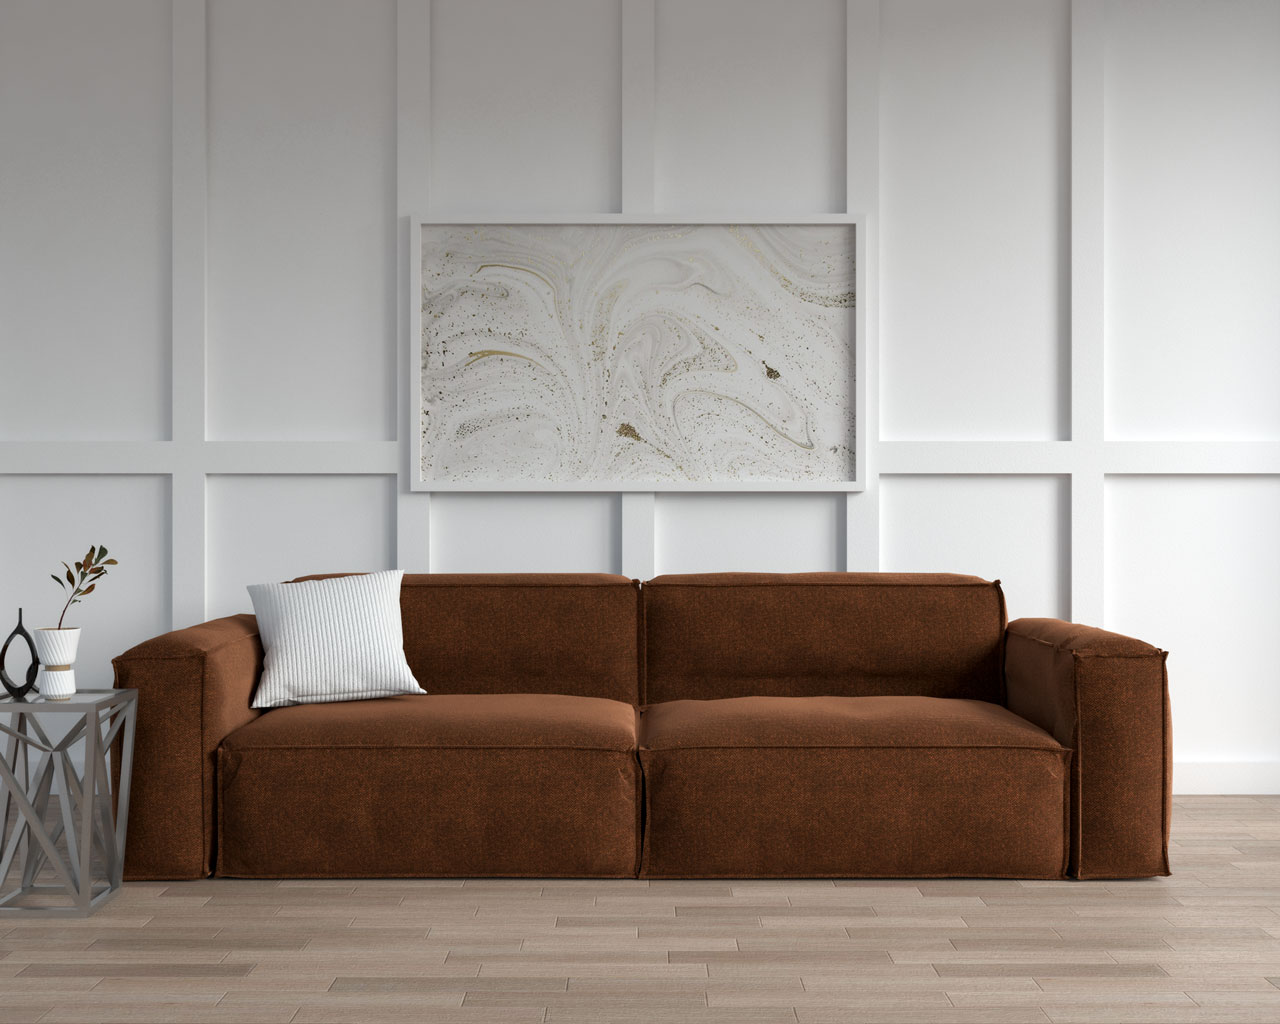 What Cushion Color Goes With Brown Sofa